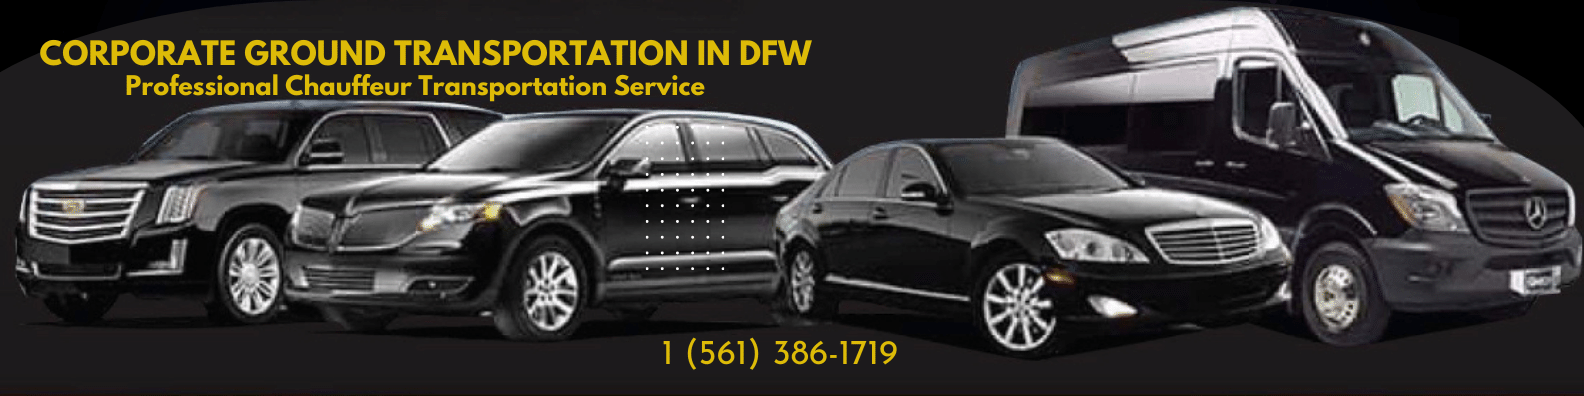 at the image showing prestige car and limo dallas fleet